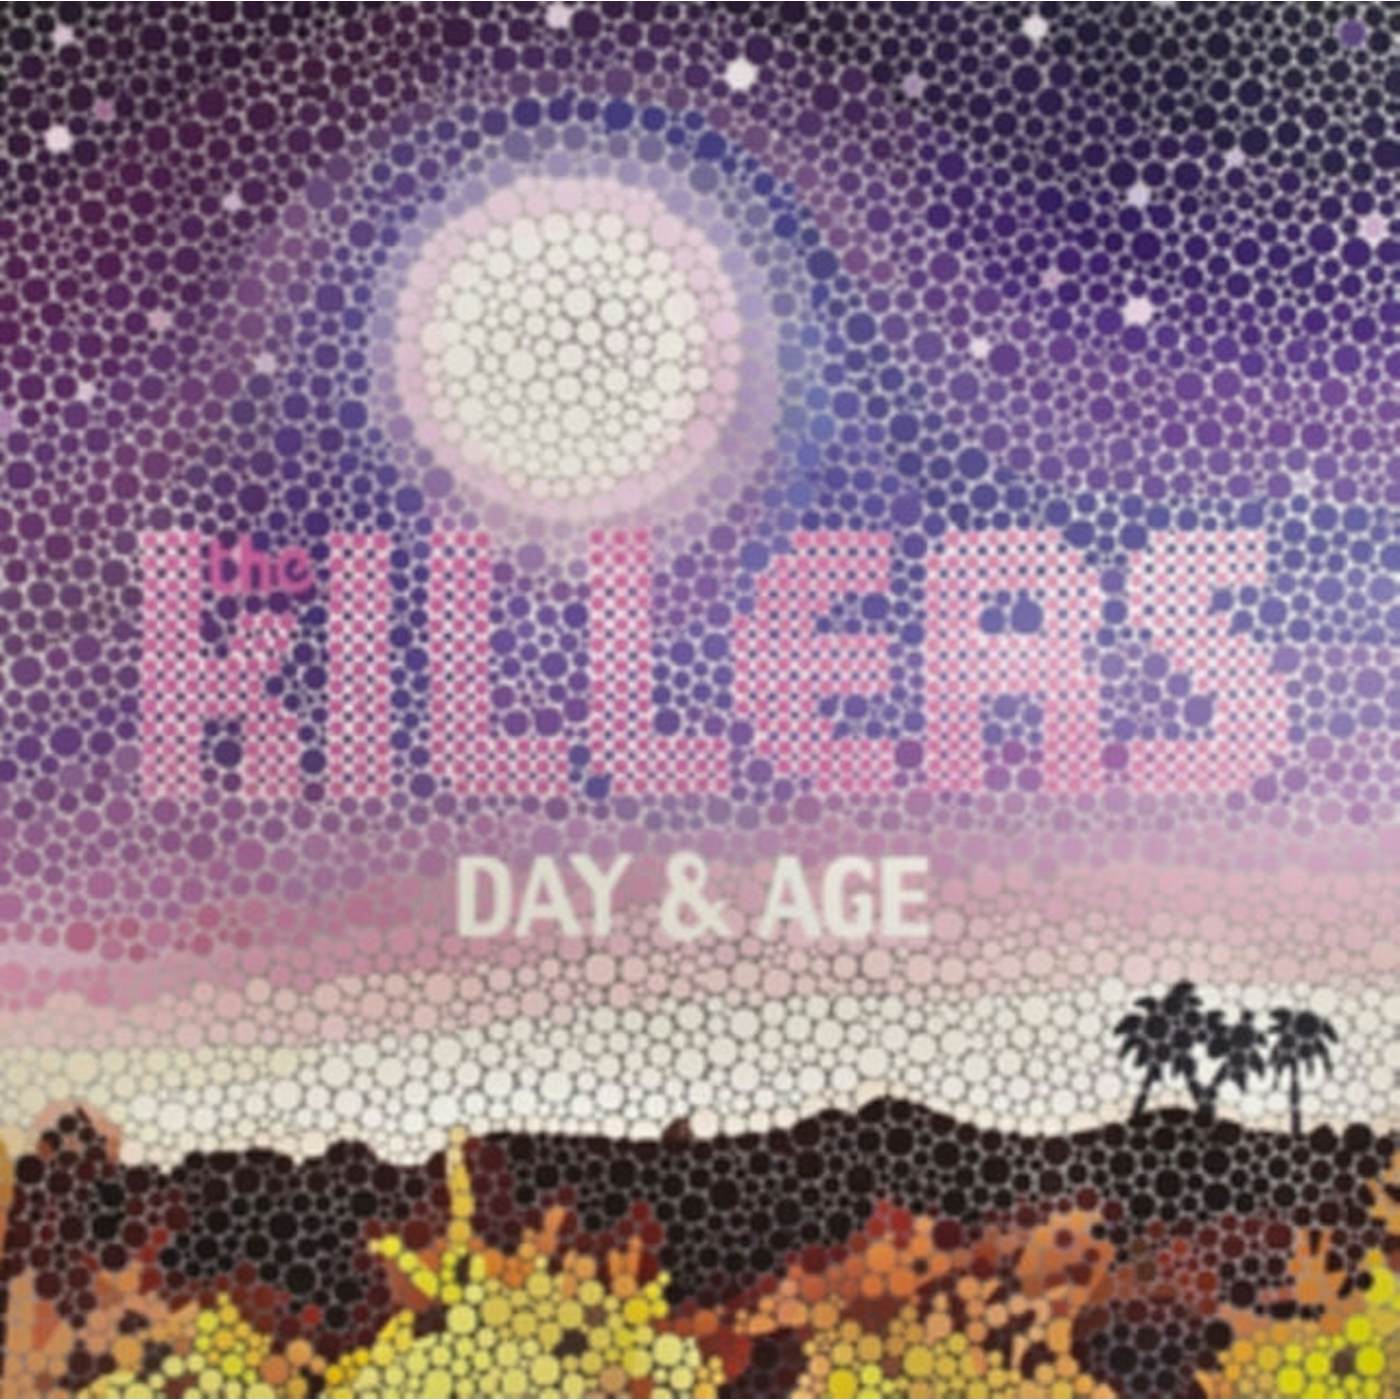 The Killers LP Vinyl Record - Day & Age